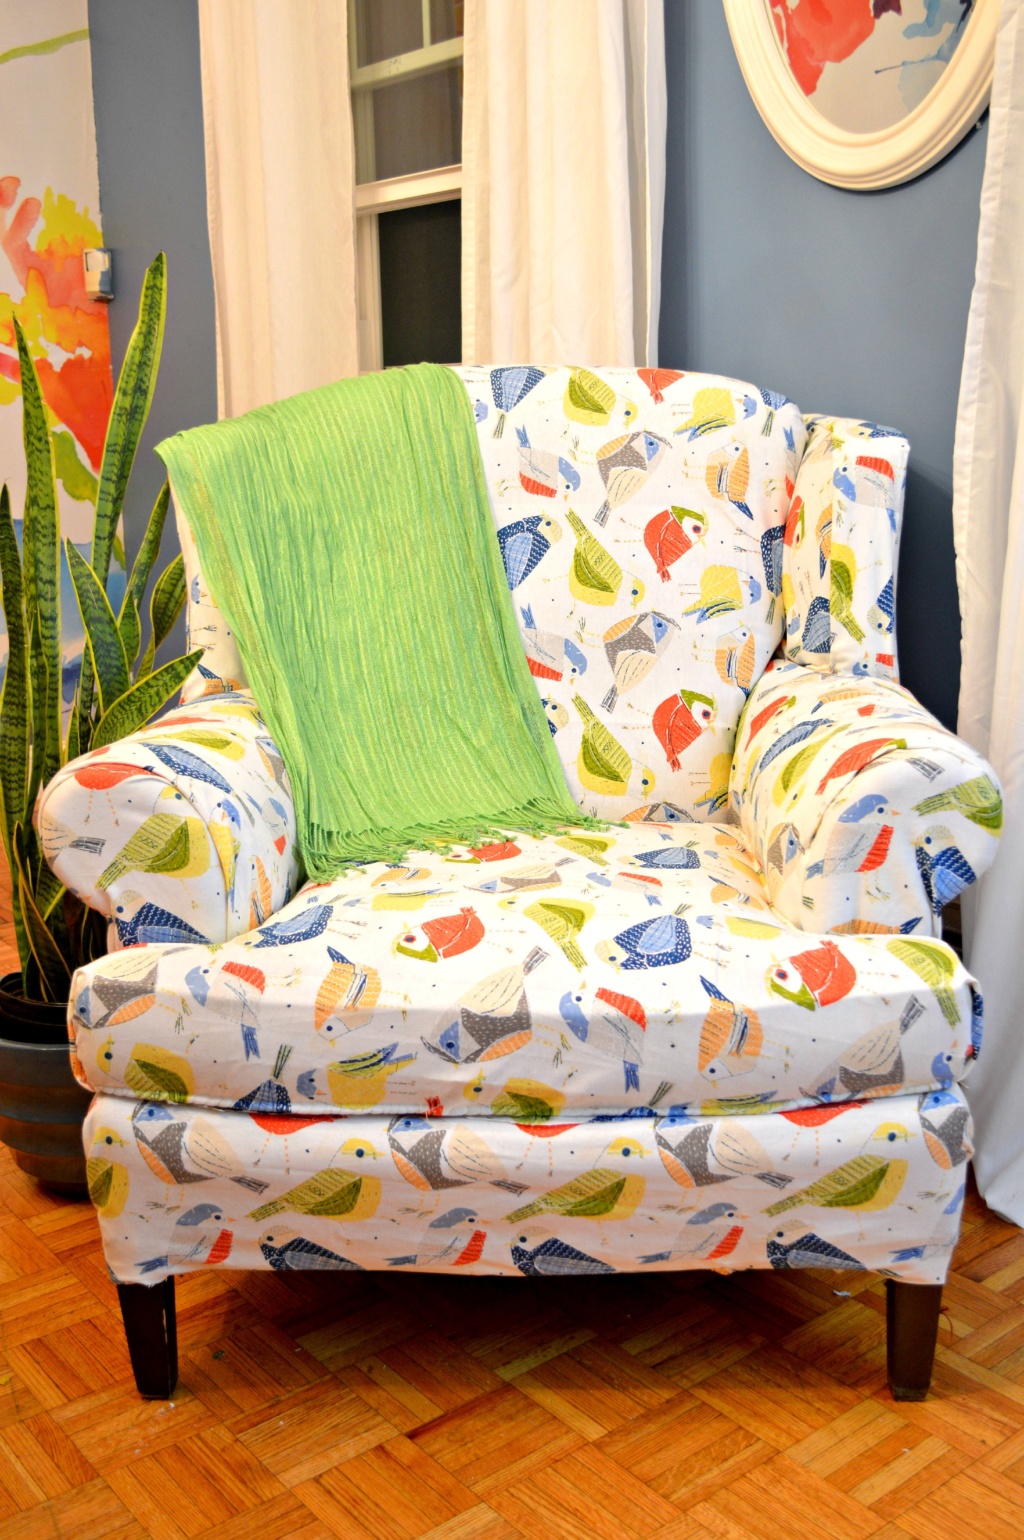 Tips for a (mostly) No Sew Reupholstered Chair